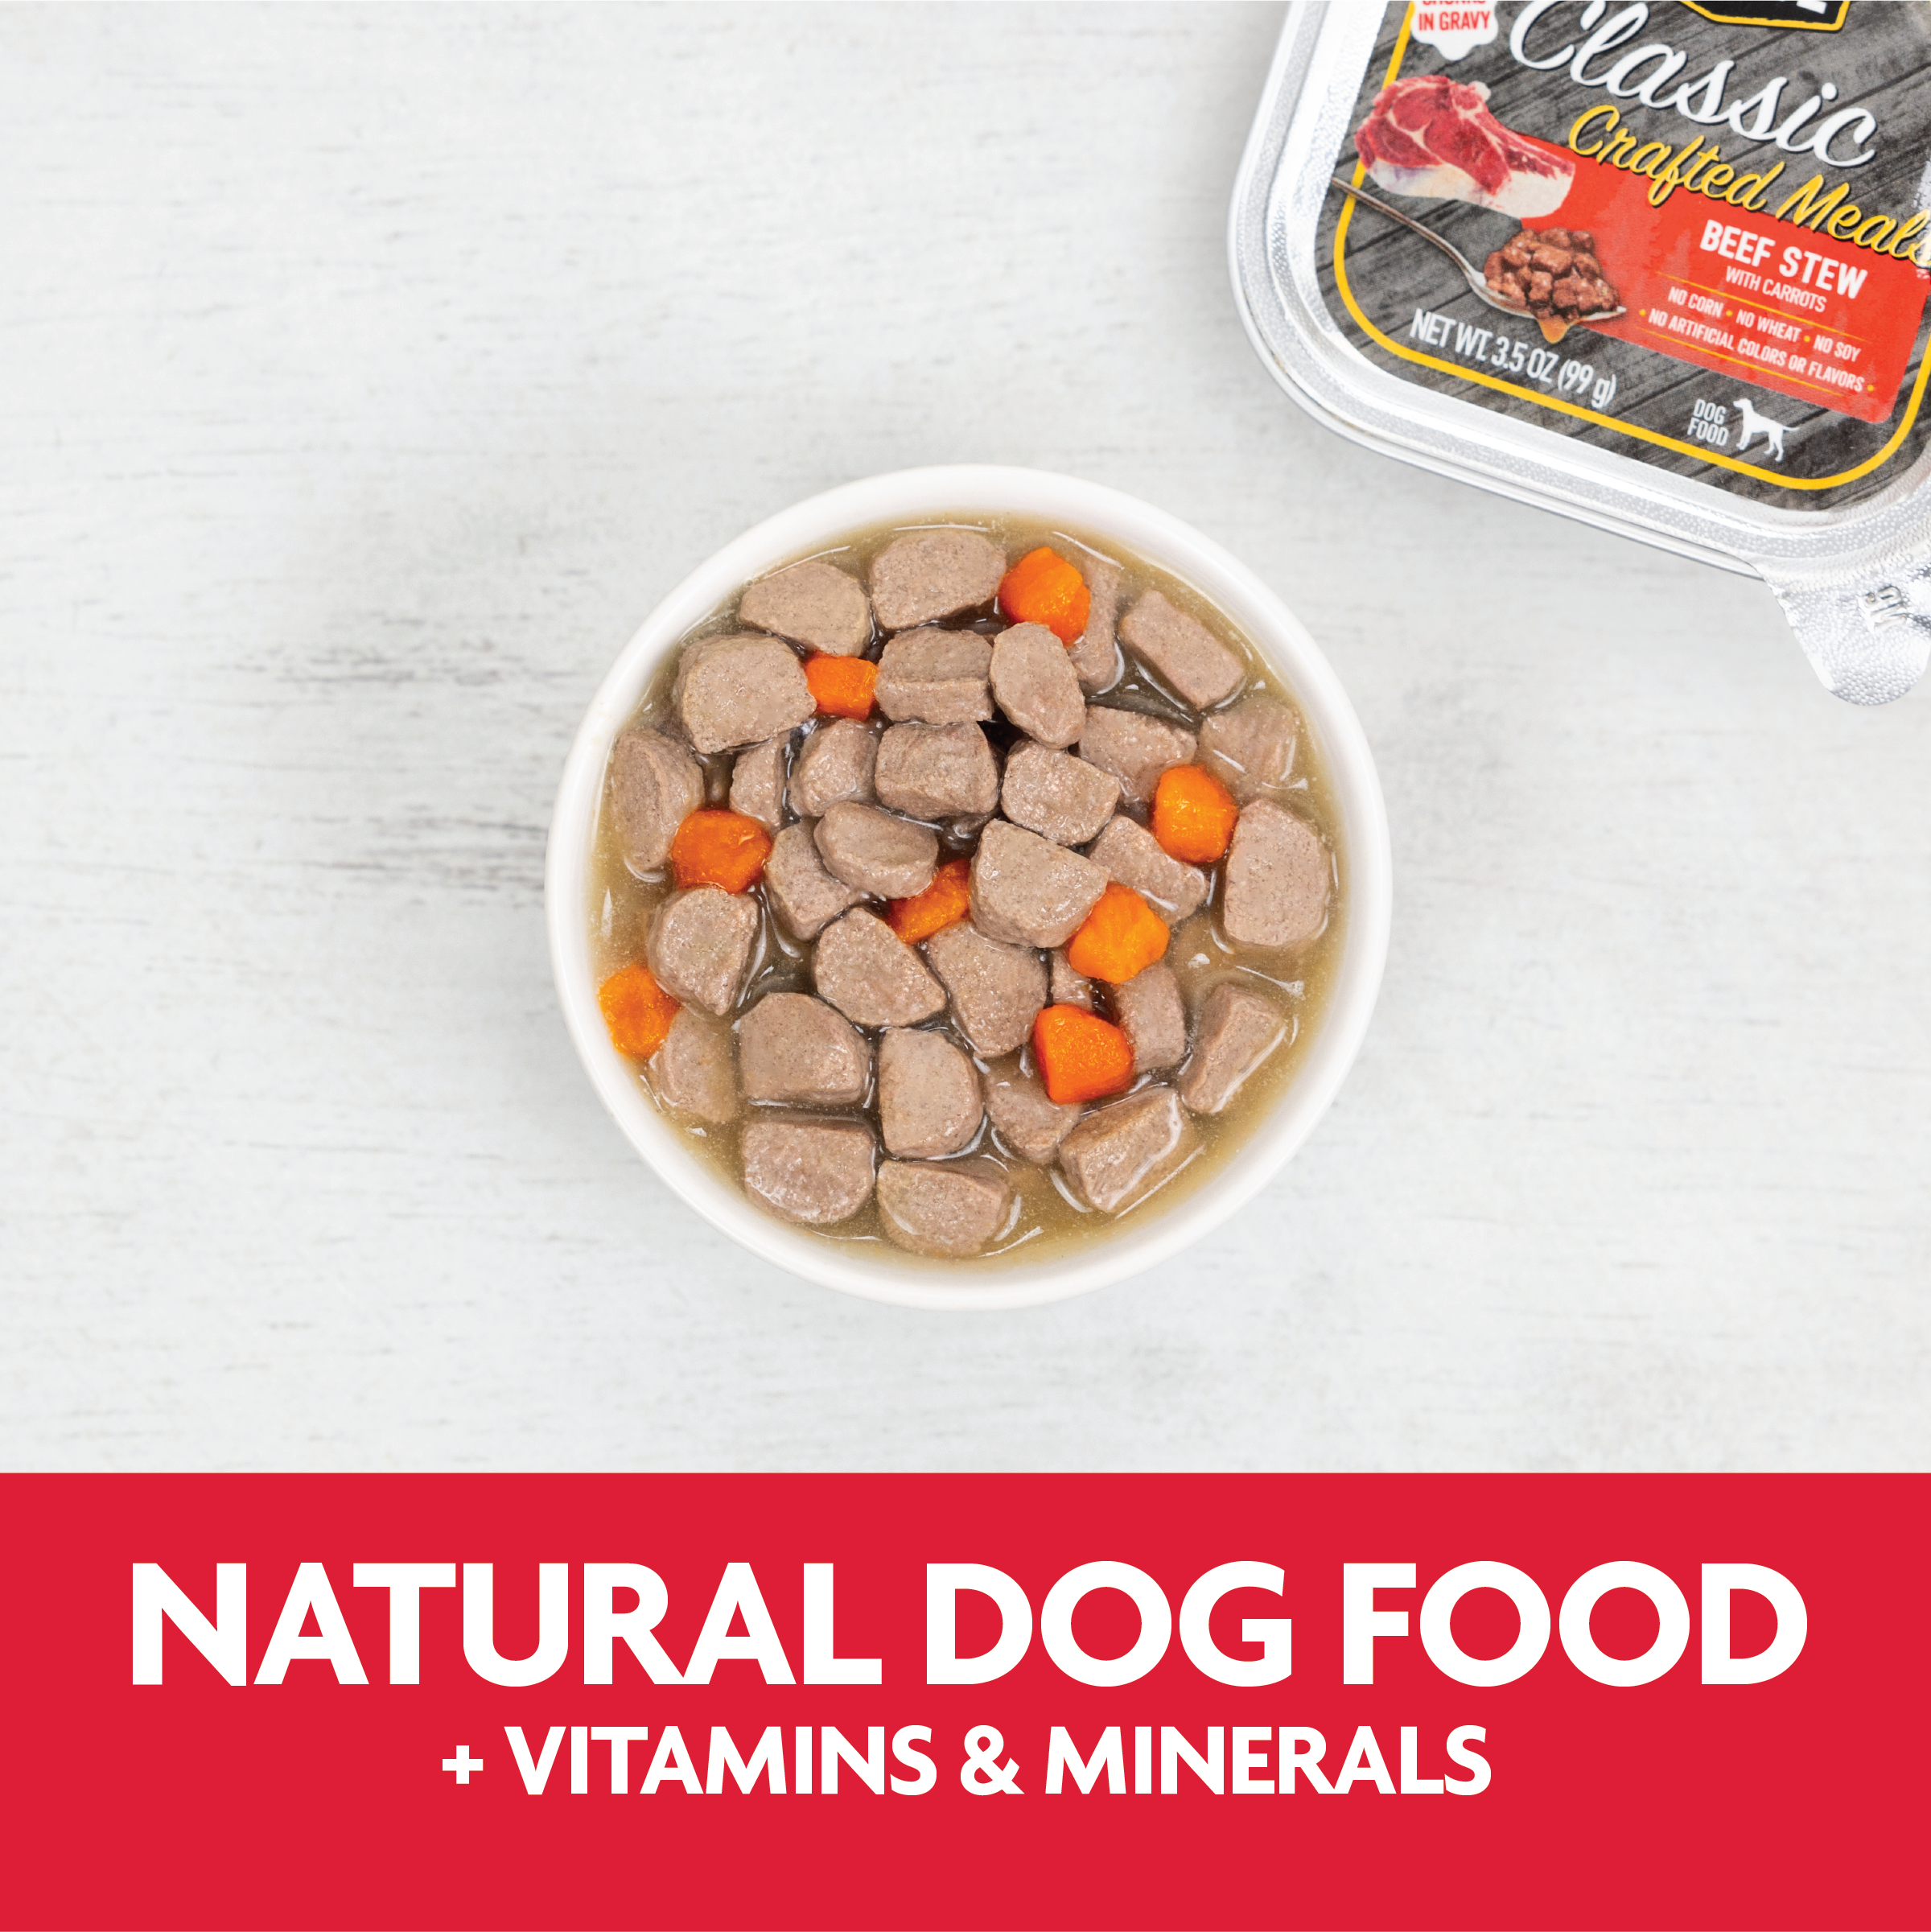 Evolve_Dog_Classic_CraftedMeals_BeefStew_Layout-09.png